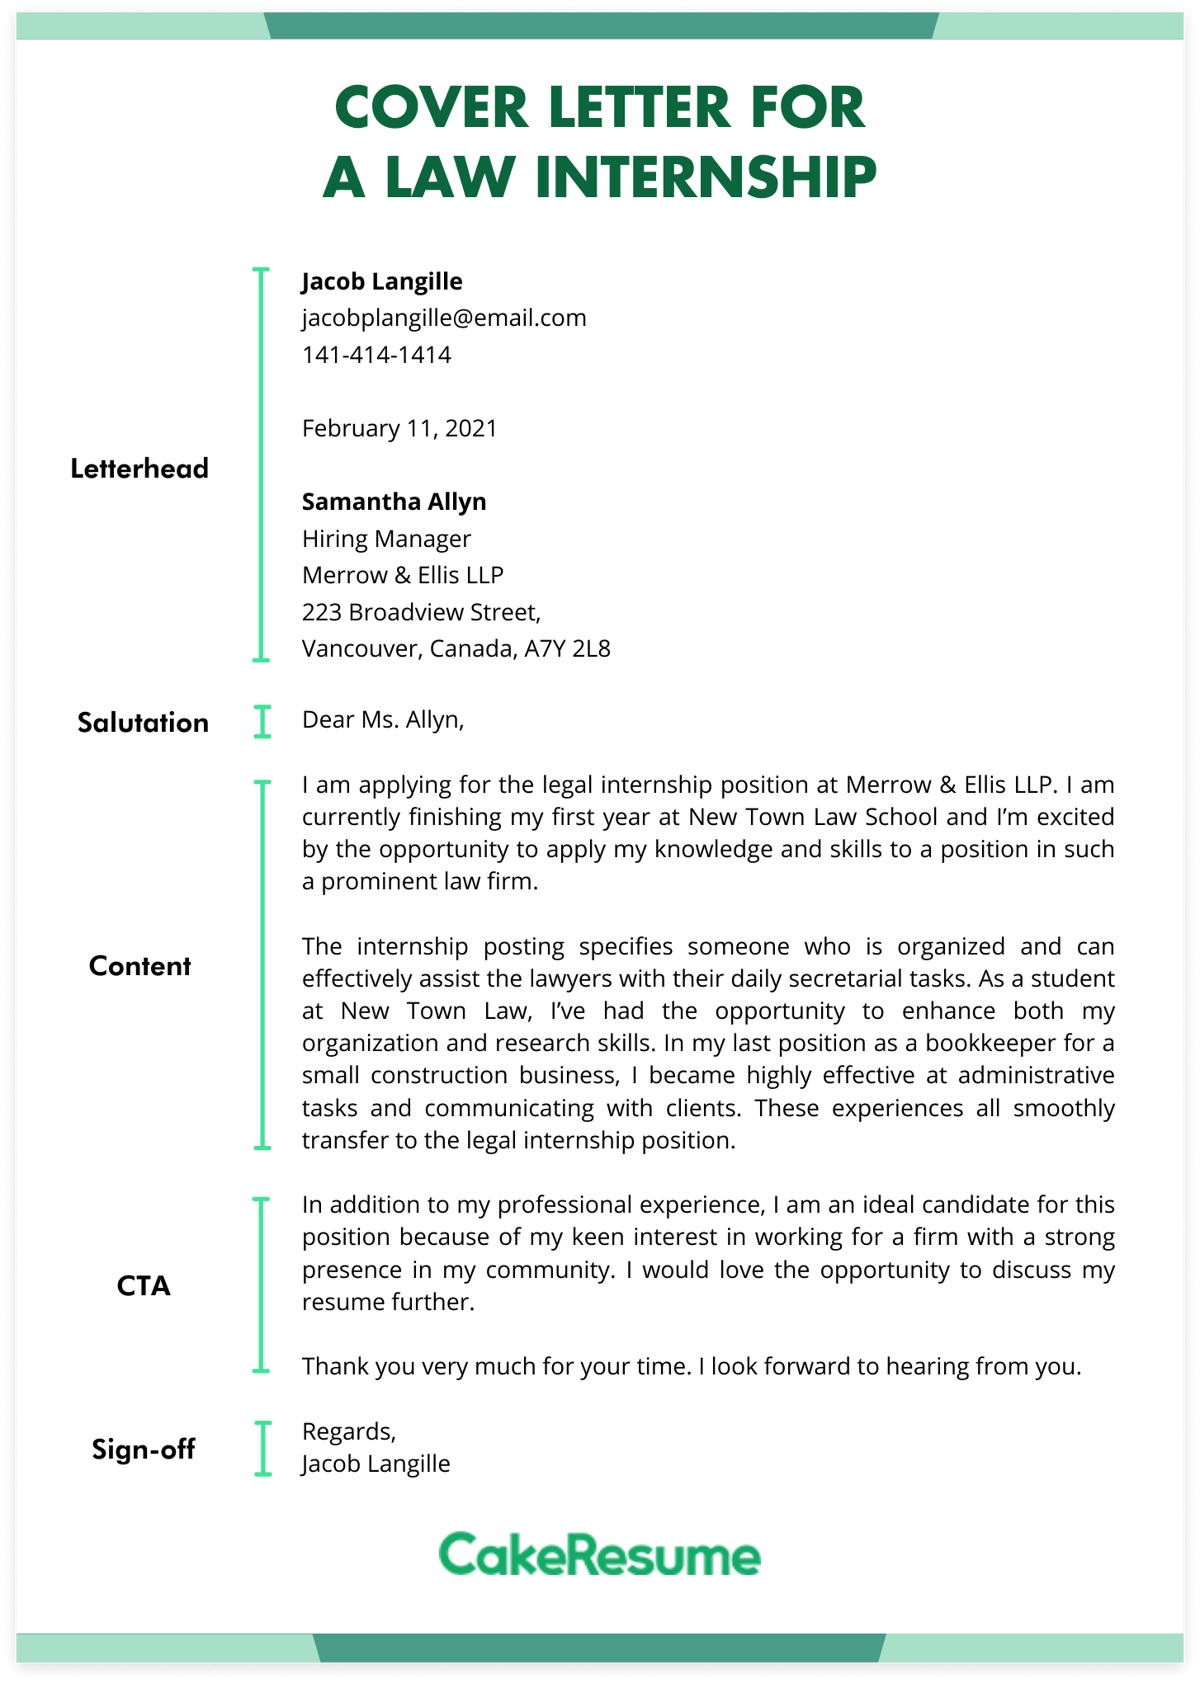 Cover Letter for a Law Internship